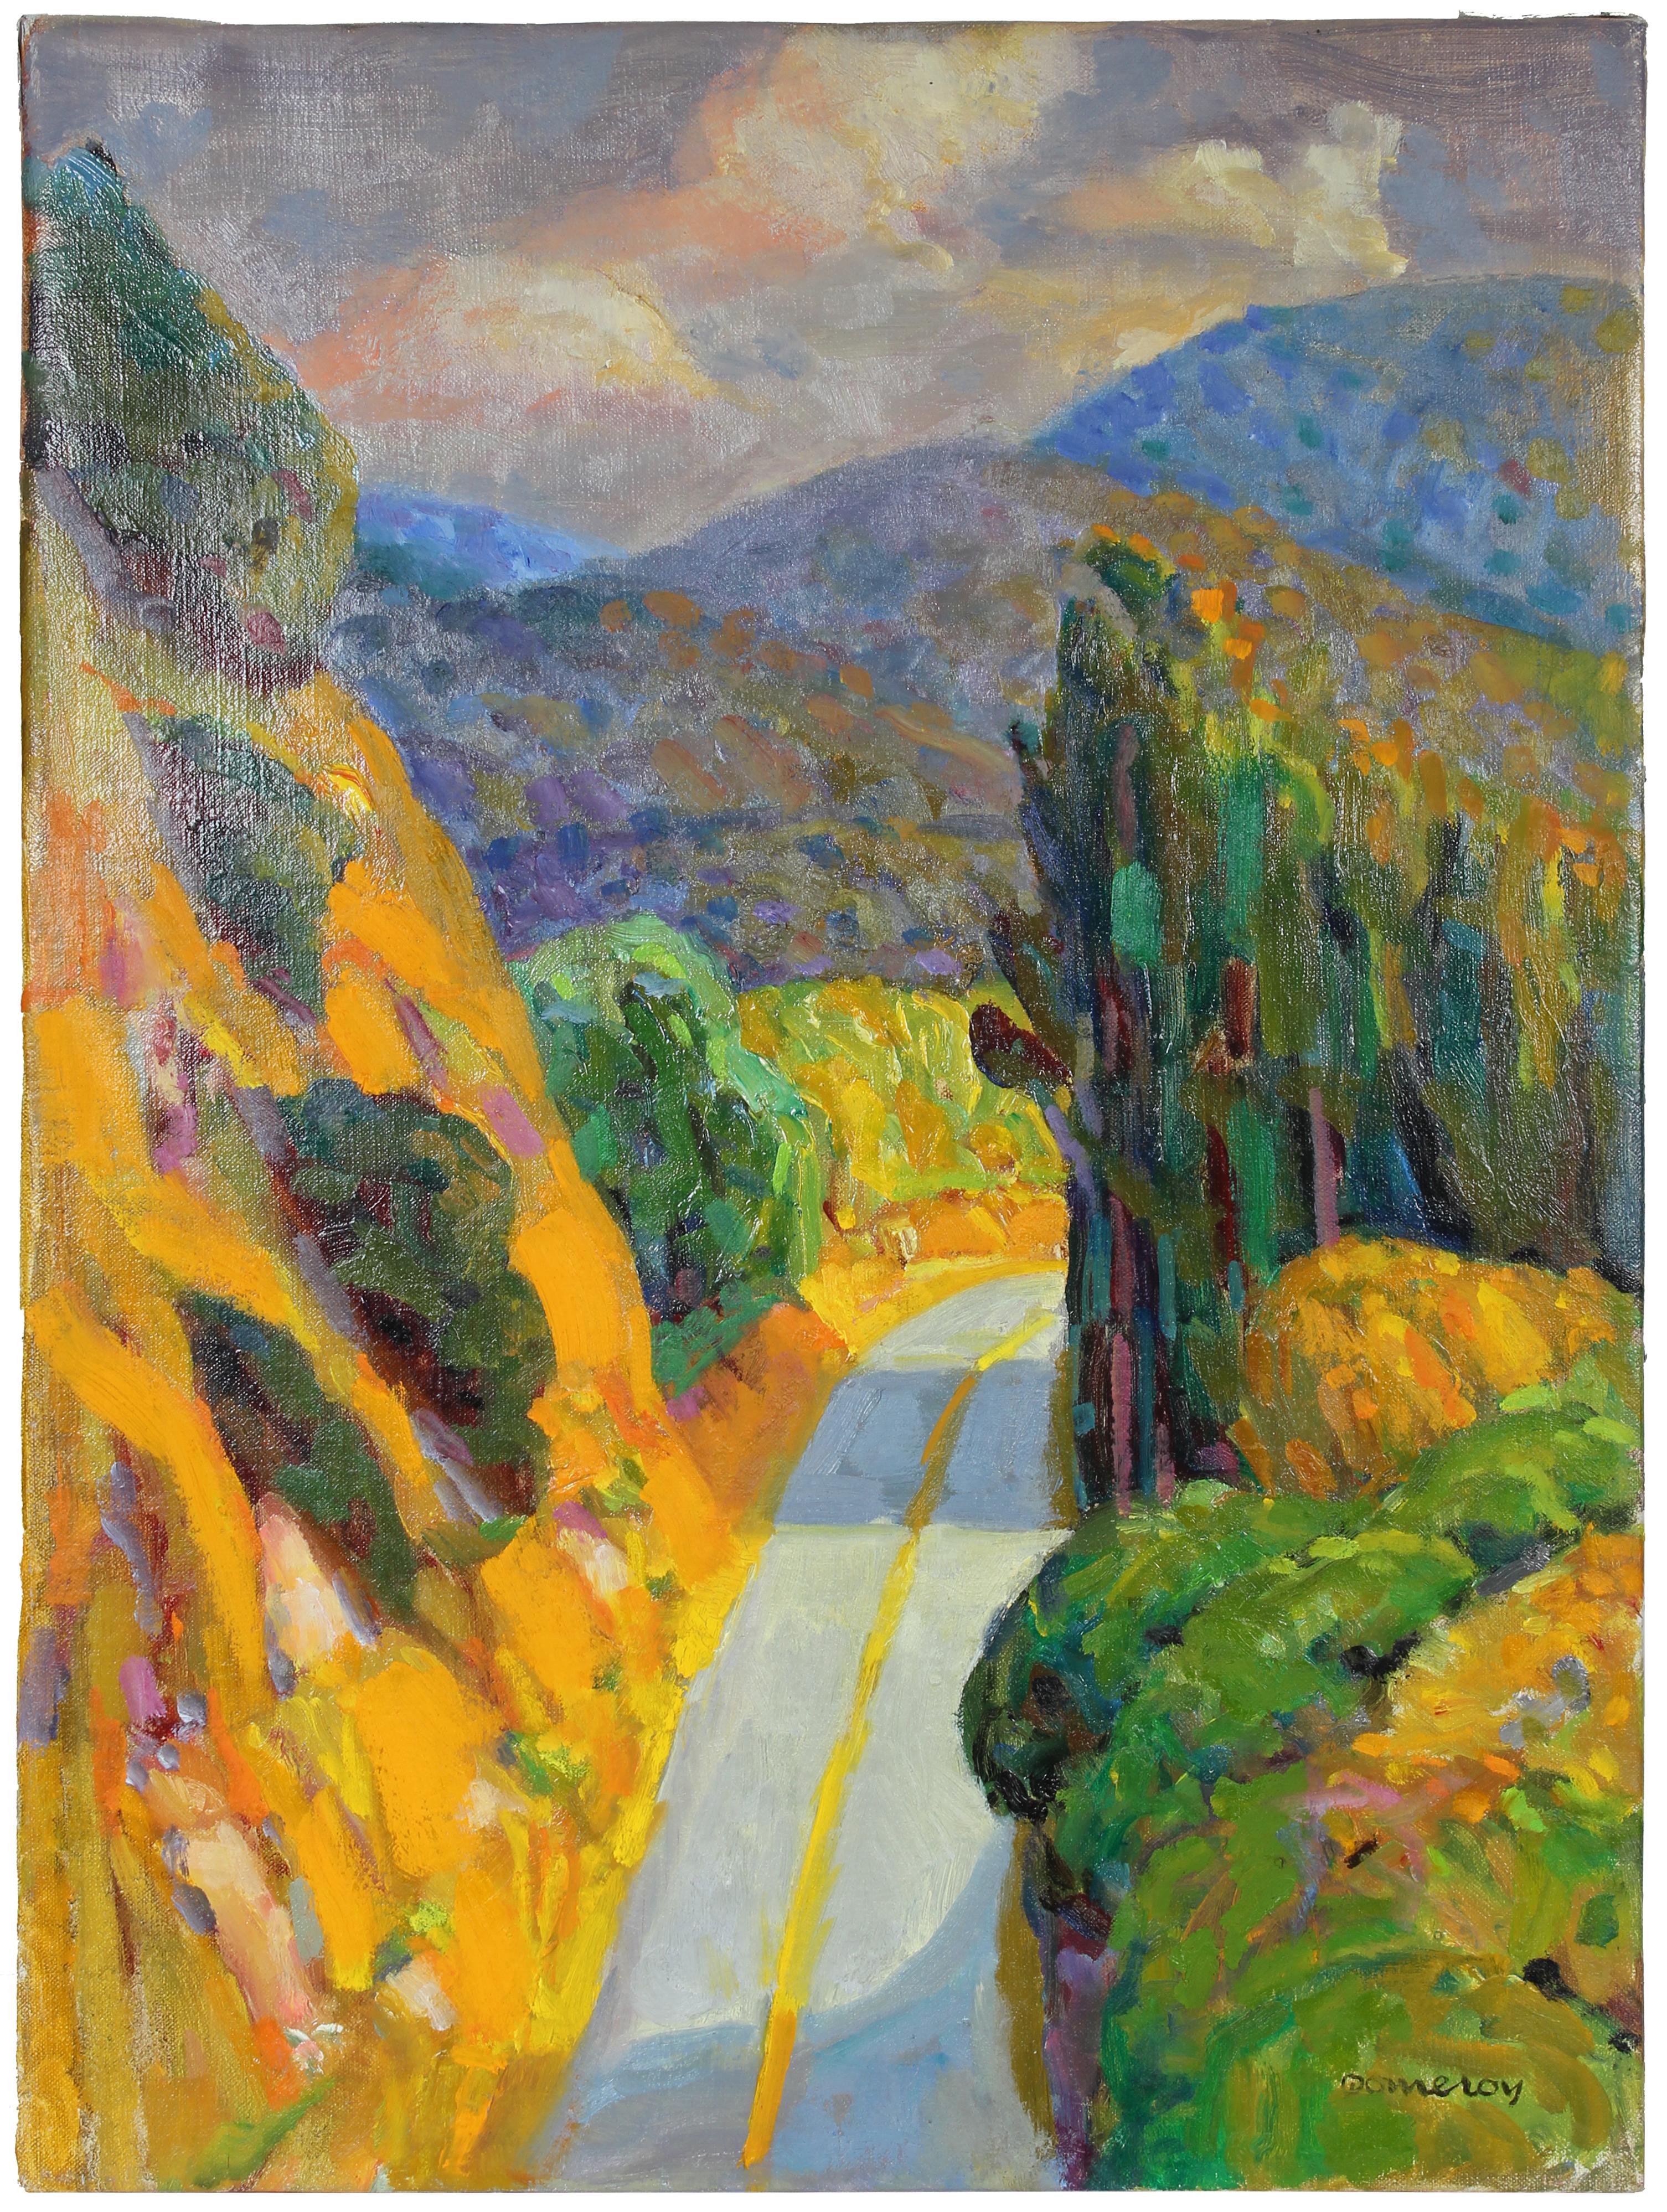 Frederick Pomeroy Landscape Painting - Colorful Oil on Canvas Carmel Valley Landscape with Mountains, Trees and Road